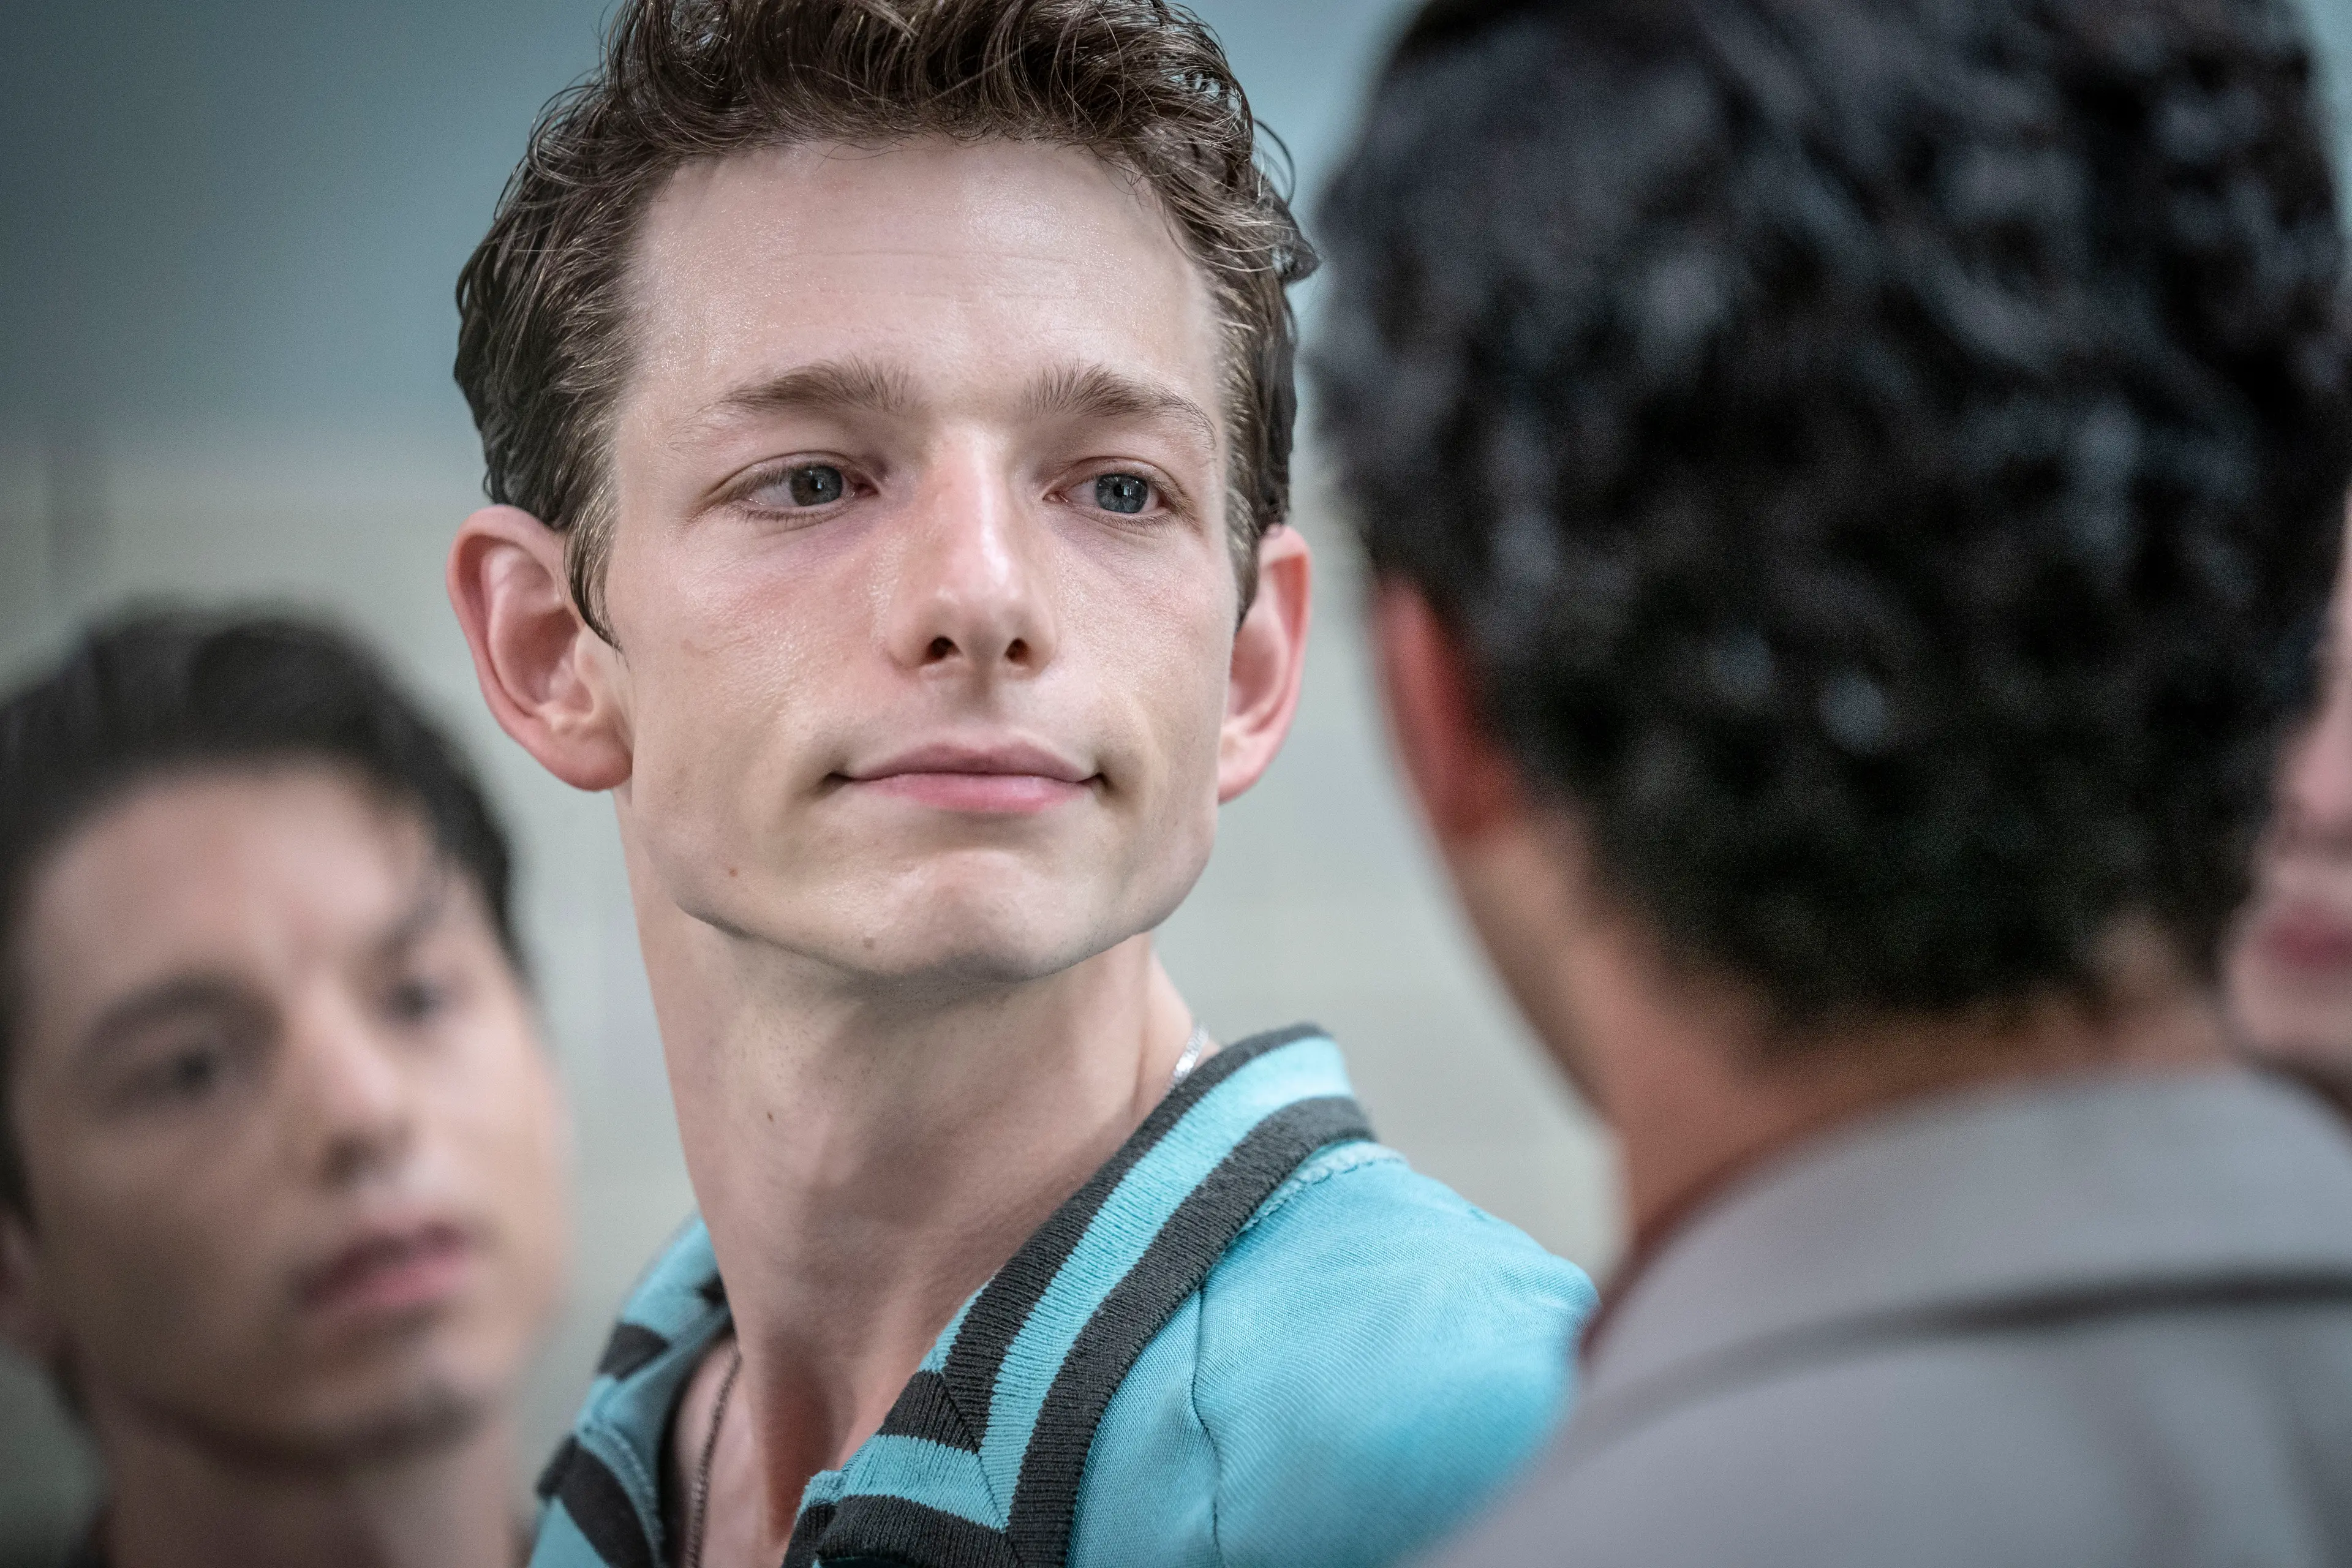 Mike Faist as Riff in 20th Century Studios' WEST SIDE STORY. Photo by Niko Tavernise. © 2021 20th Century Studios. All Rights Reserved.